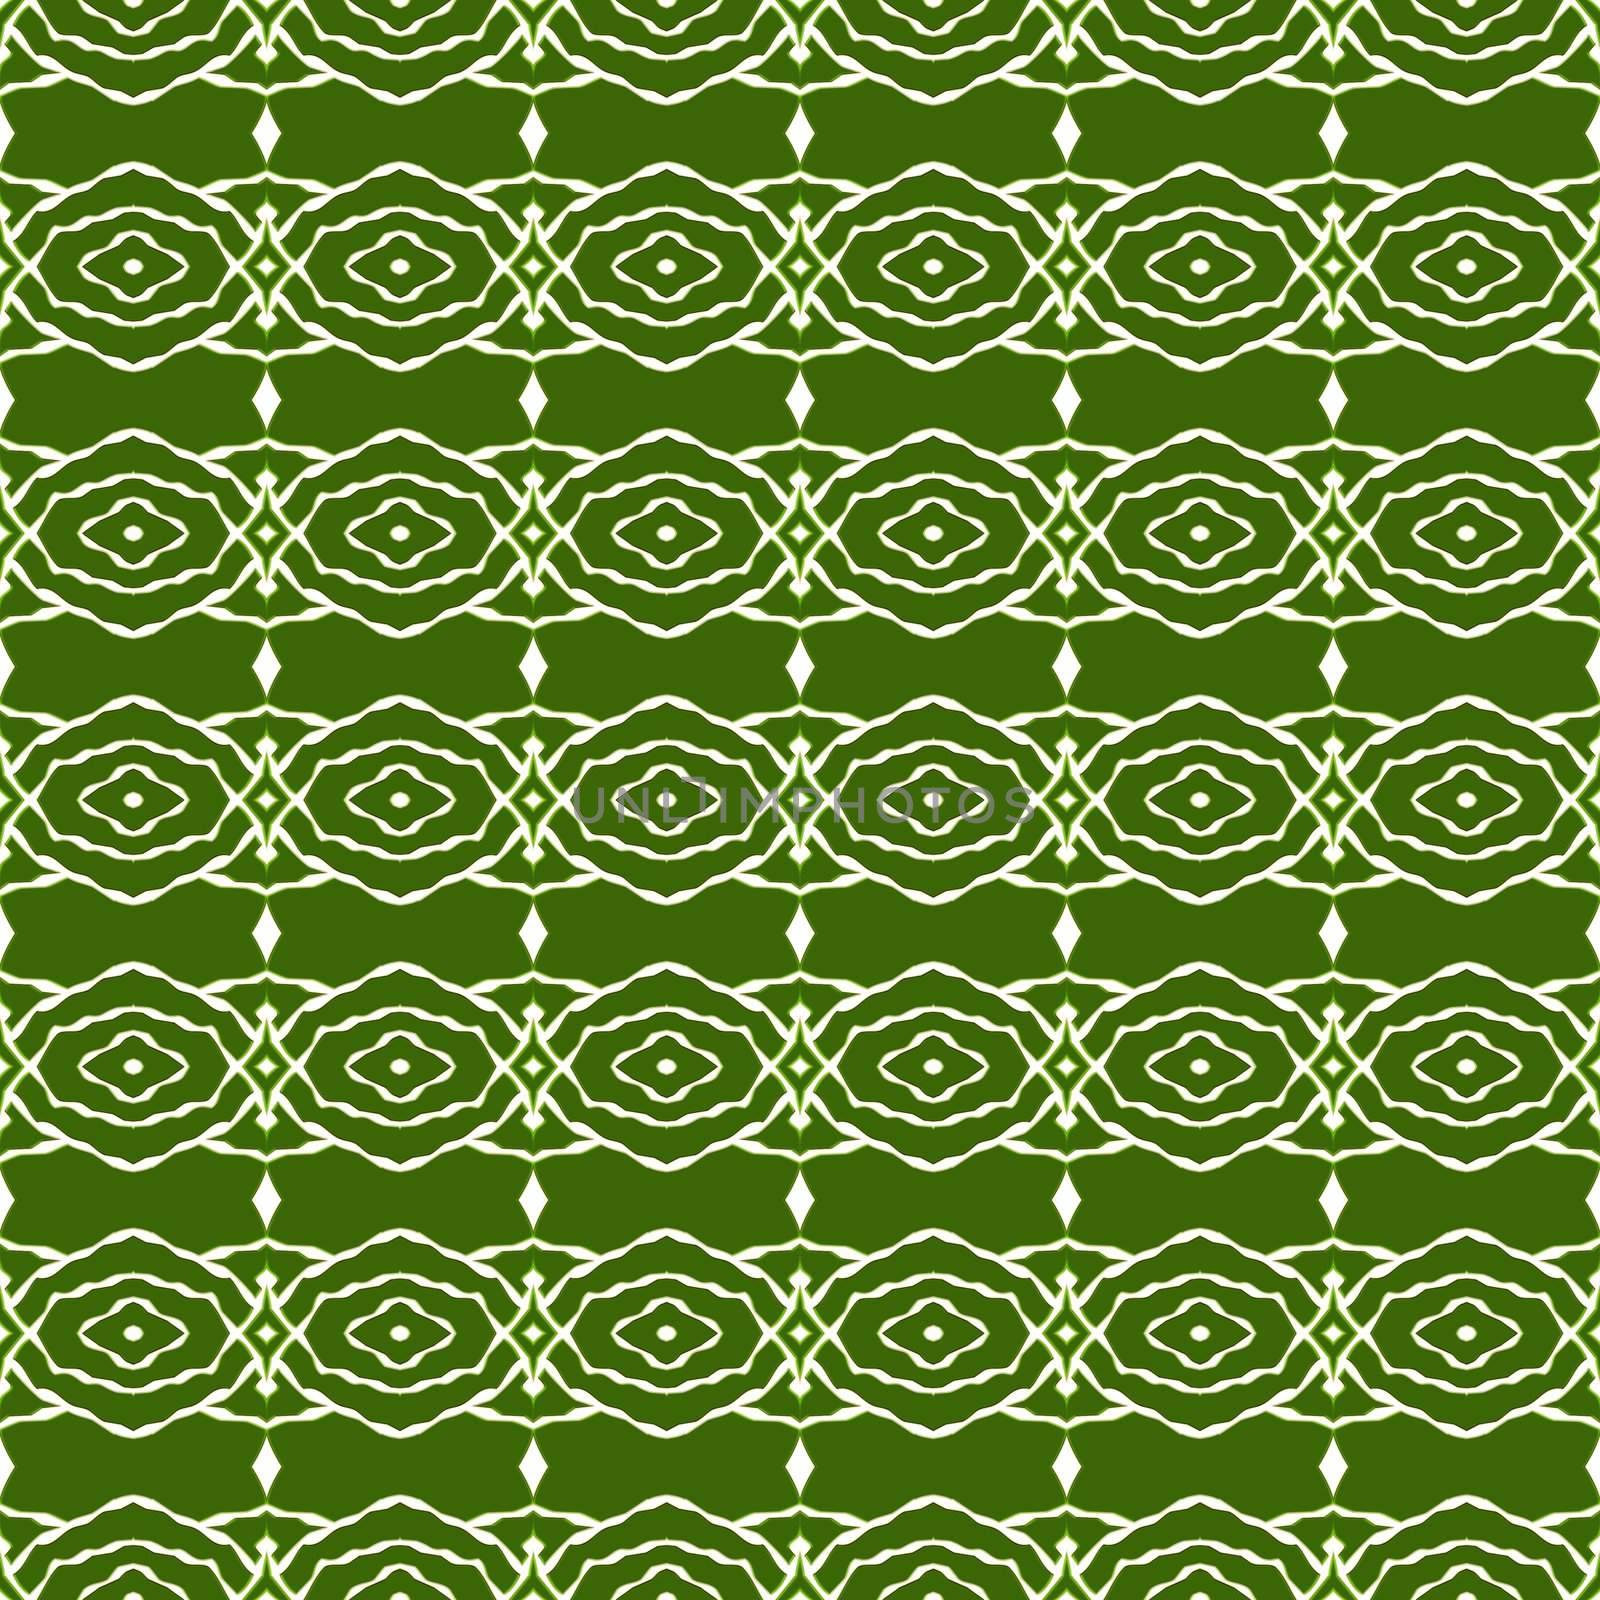 seamless texture of abstracted olive green shapes in tribal style